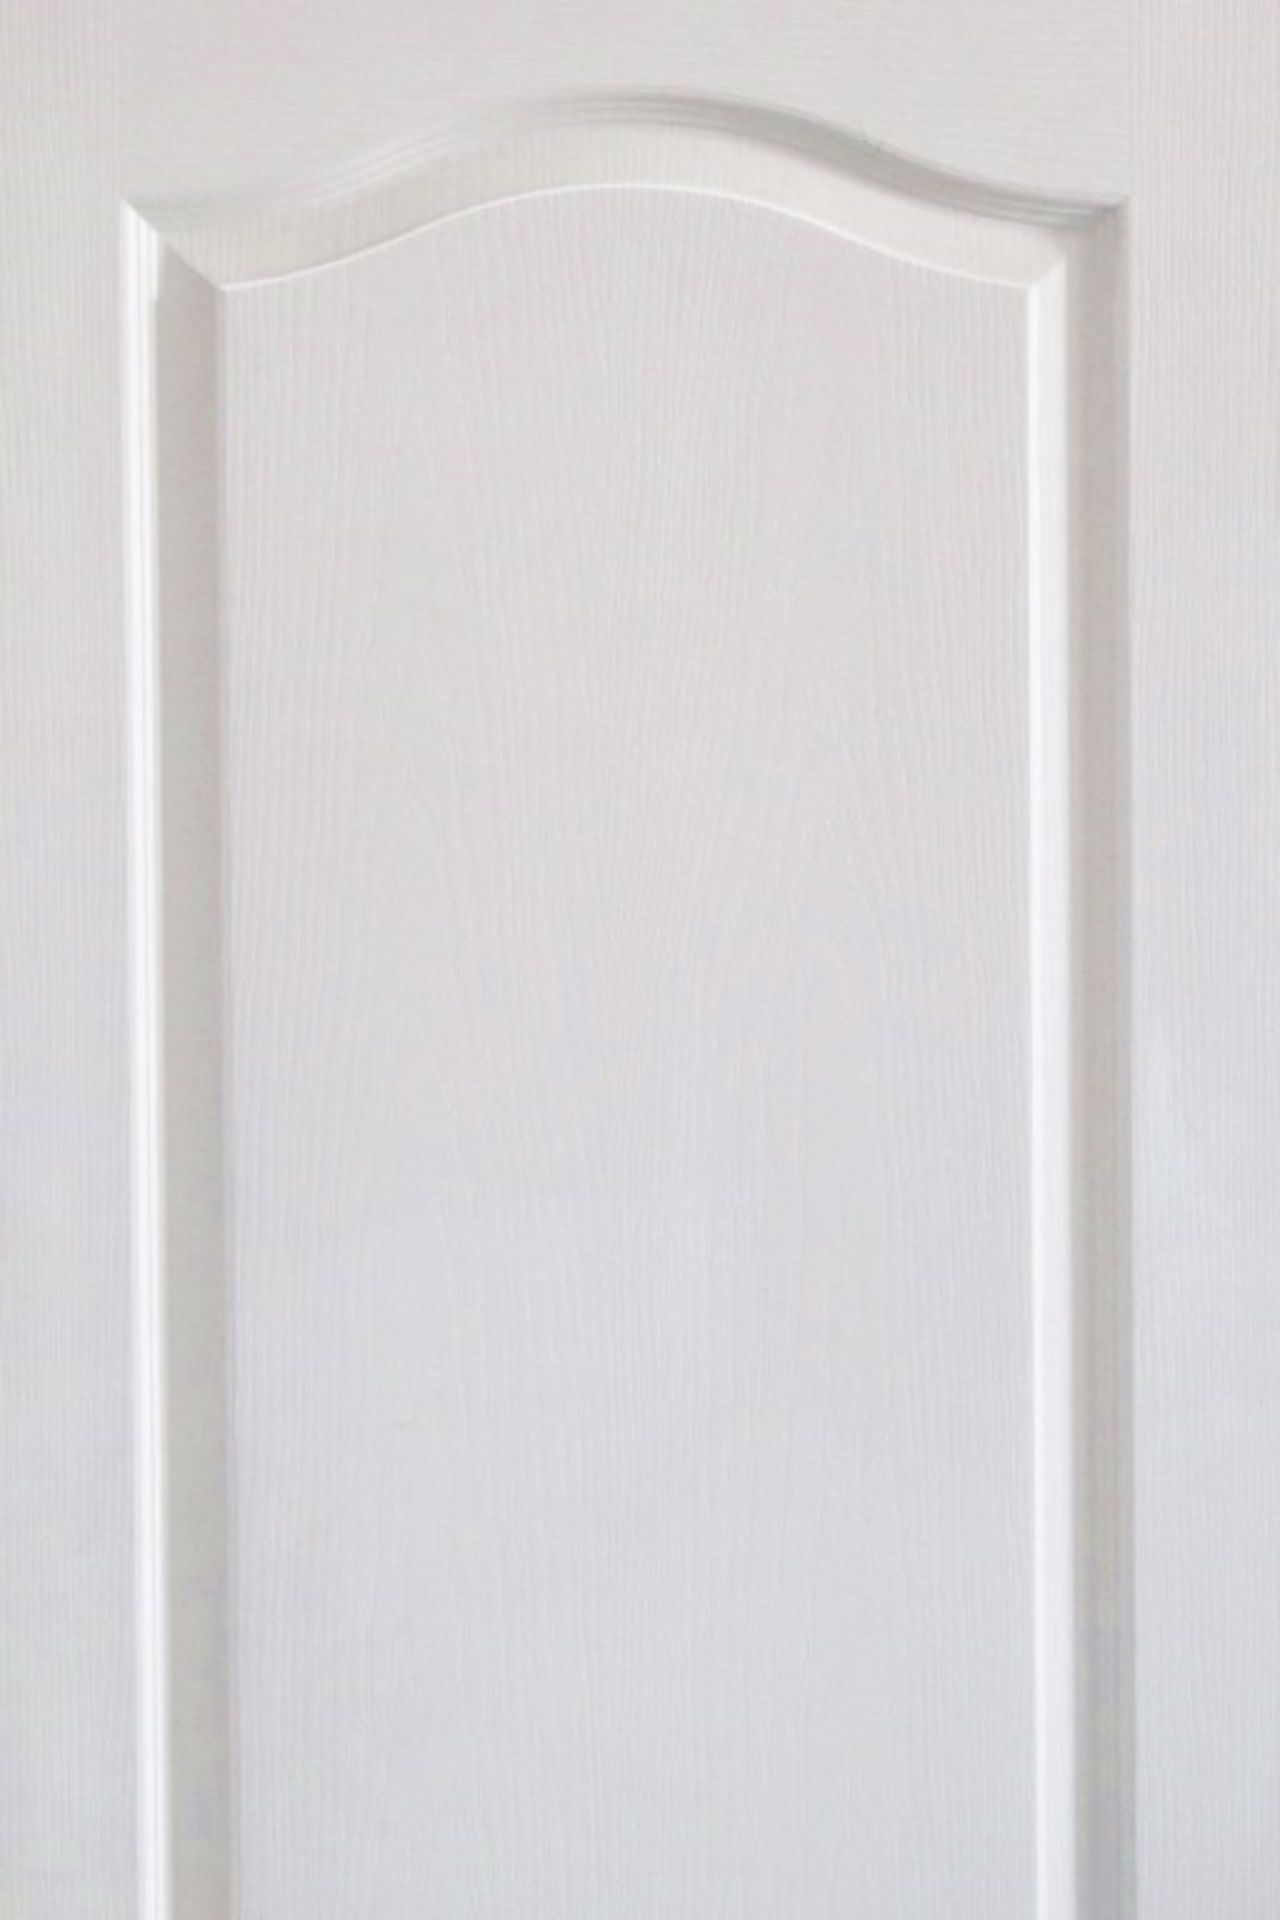 1 x Solid Wood Interior Fire Door - In Good Condition, Complete With Brass Handles and Hinges - Image 4 of 6